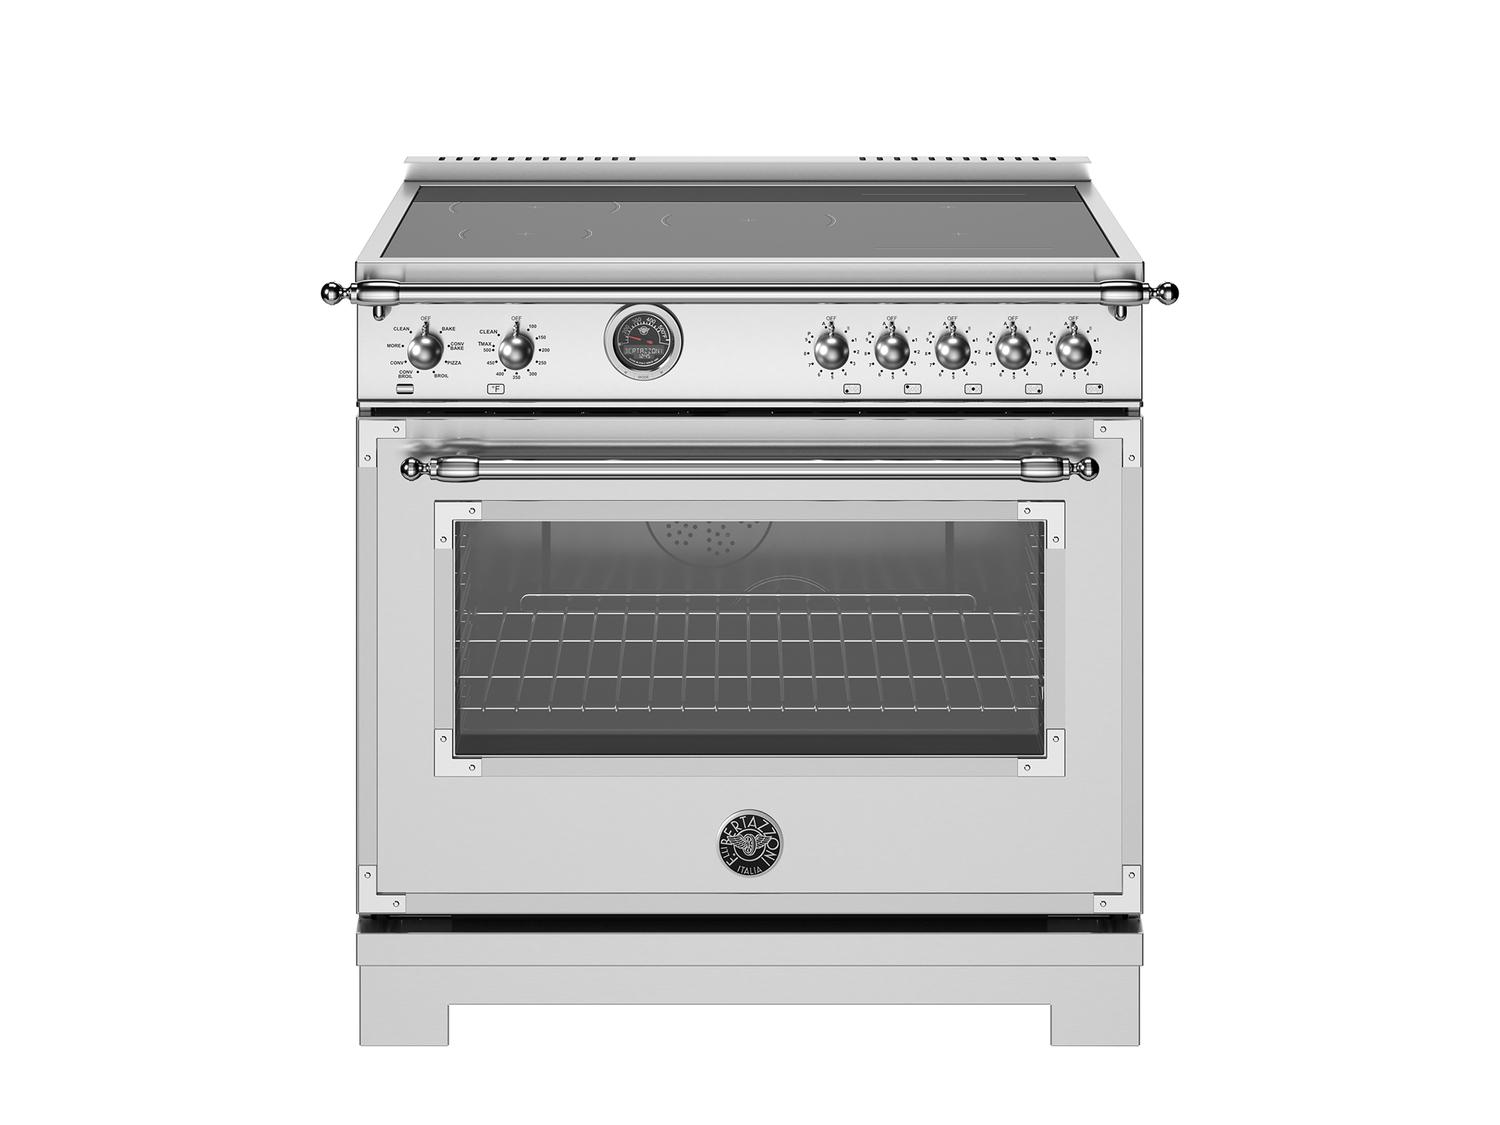 Bertazzoni HER365ICFEPXT 36 Inch Induction Range, 5 Heating Zones And Cast Iron Griddle, Electric Self-Clean Oven Stainless Steel